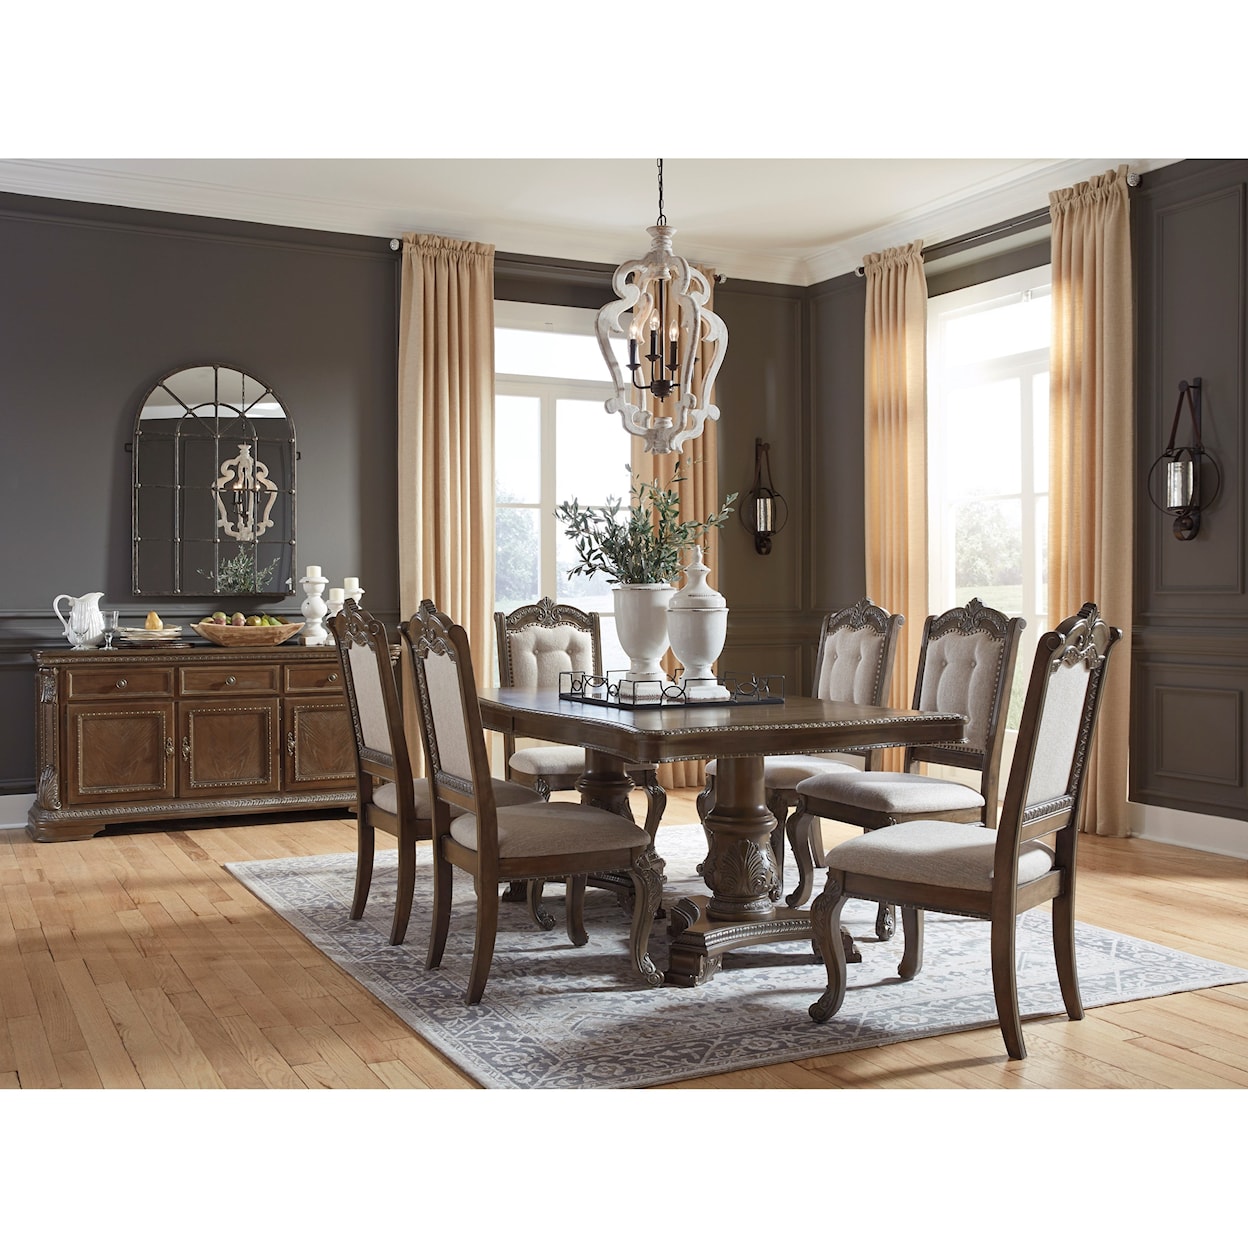 Signature Design by Ashley Charmond 7pc Dining Room Group